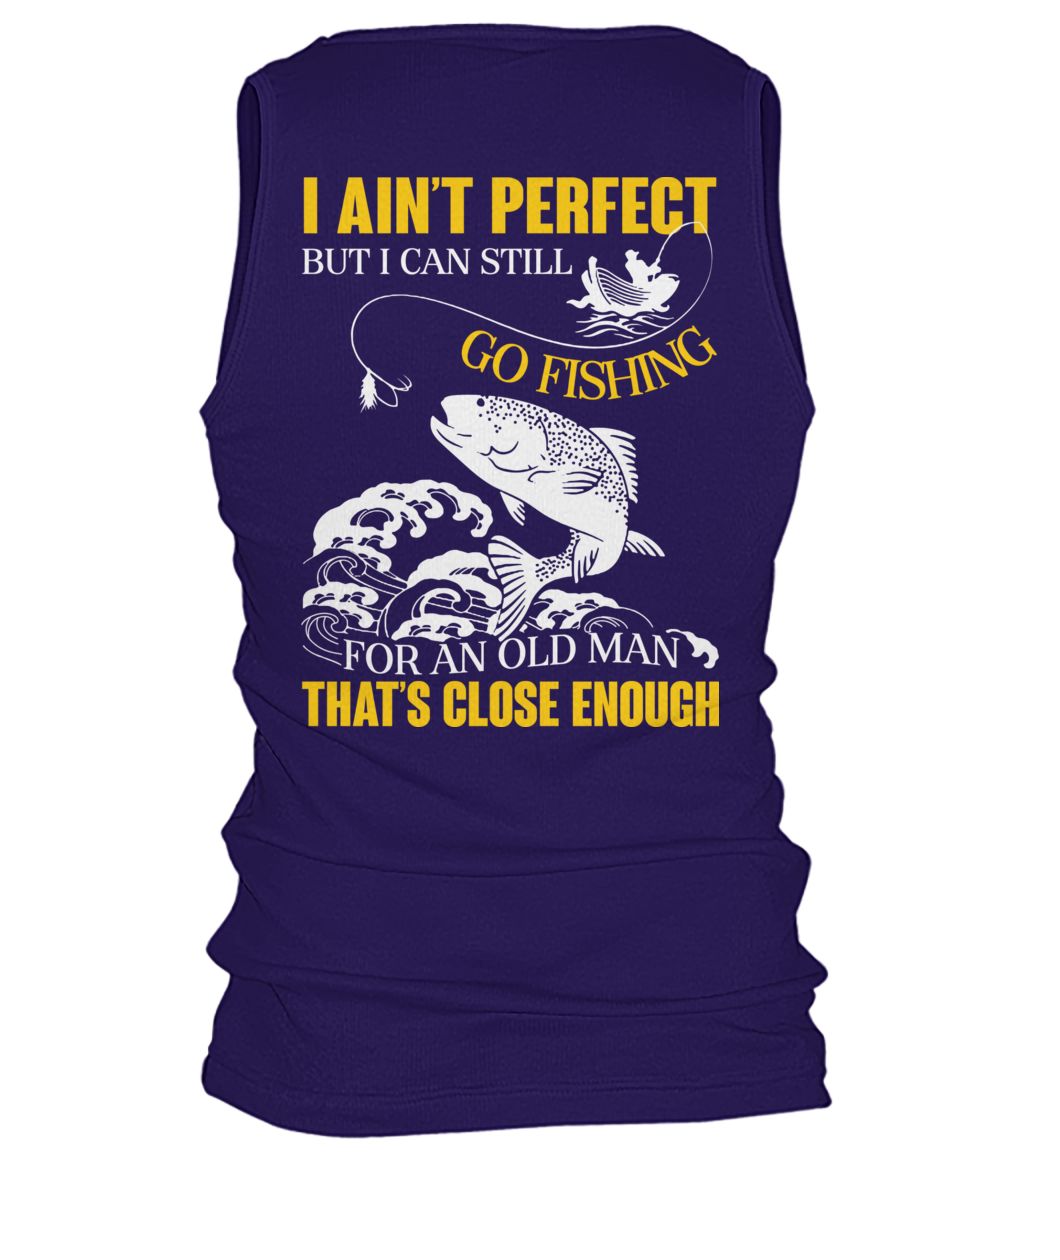 I ain't perfect but I can still go fishing for an old man that's close enough men's tank top